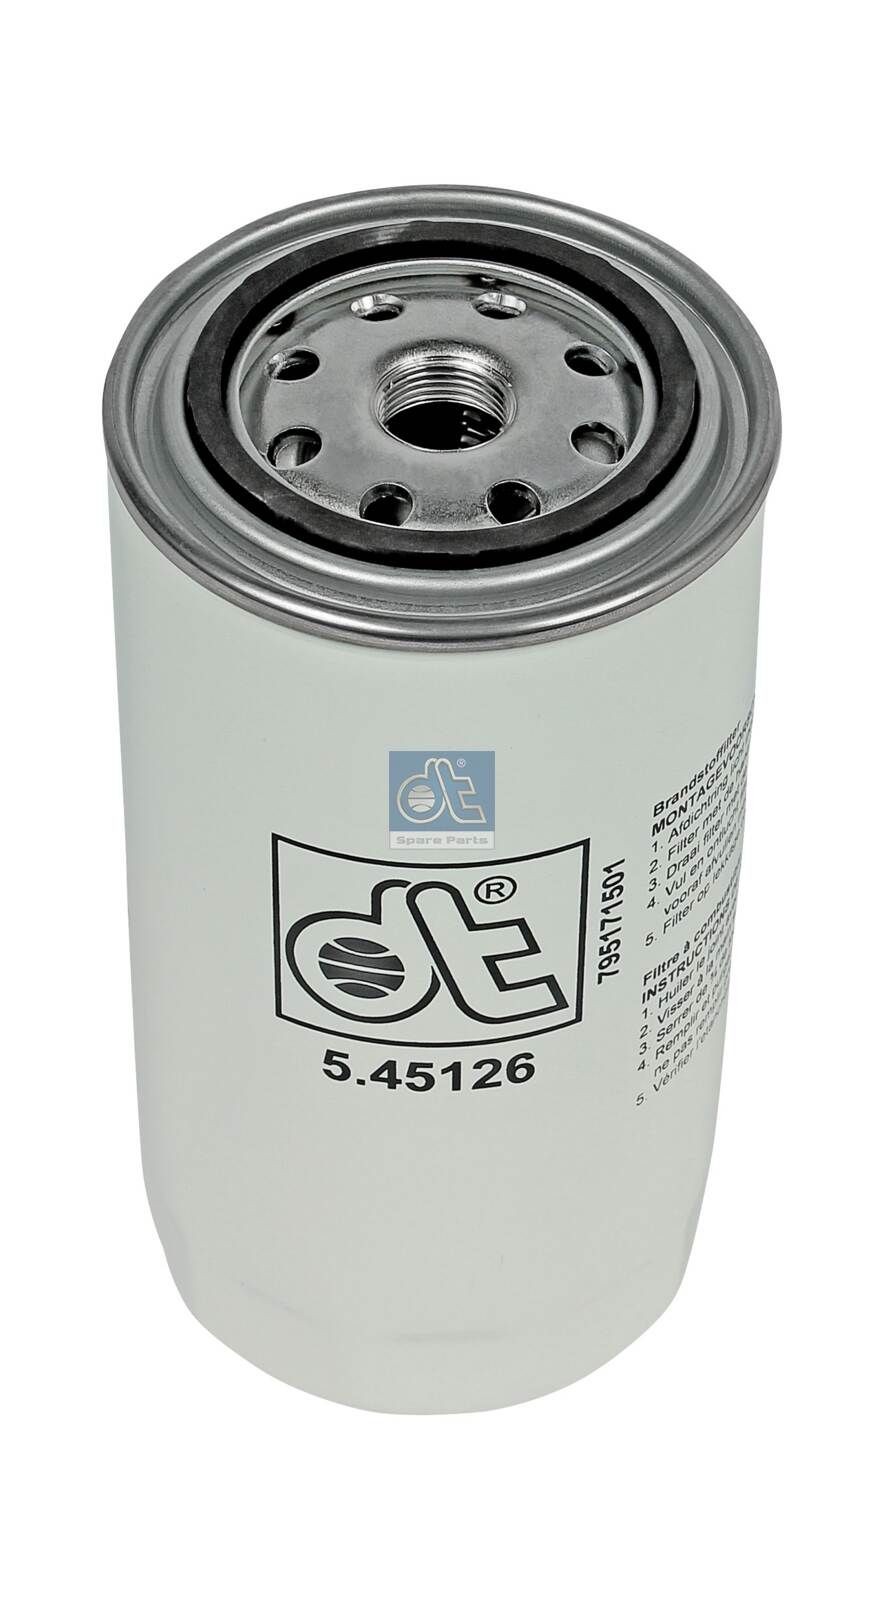 WK 950/21 DT Spare Parts 5.45126 Fuel filter 14559479